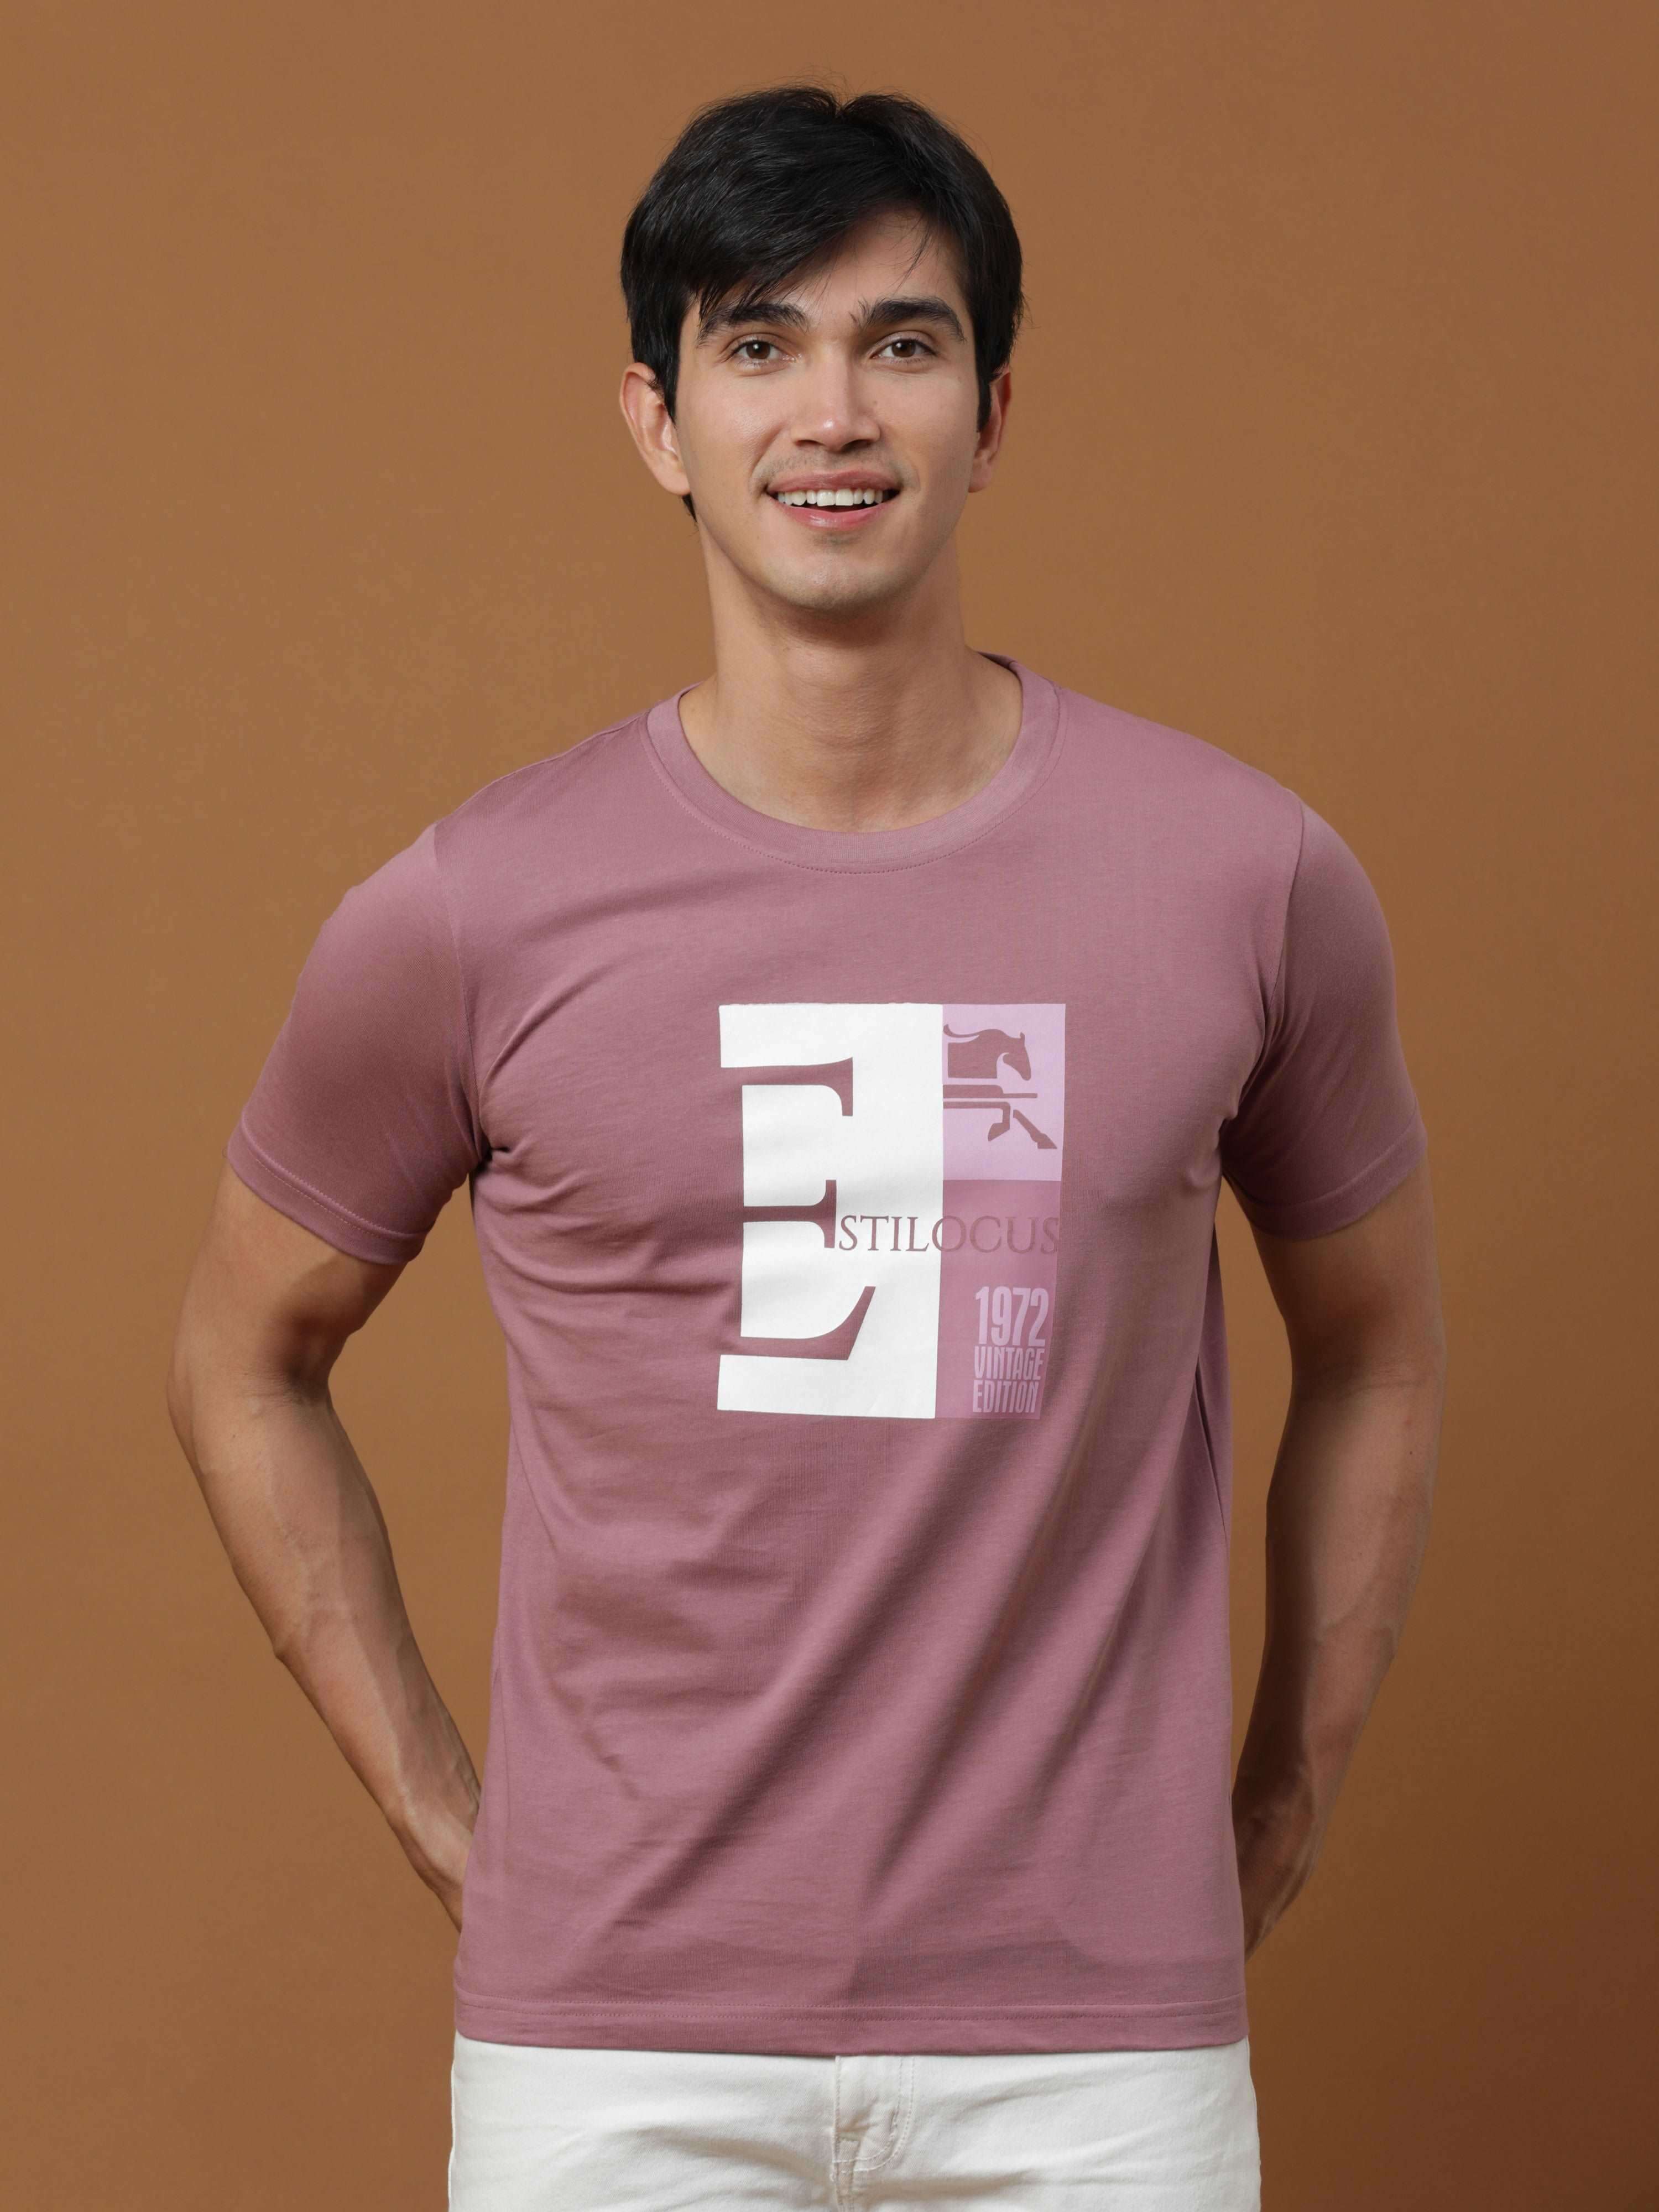 Vintage Edition Printed Peach T Shirt shop online at Estilocus. 100% Cotton Designed and printed on knitted fabric. The fabric is stretchy and lightweight, with a soft skin feel and no wrinkles. Crew neck collar which is smooth on the neck and keeps you c